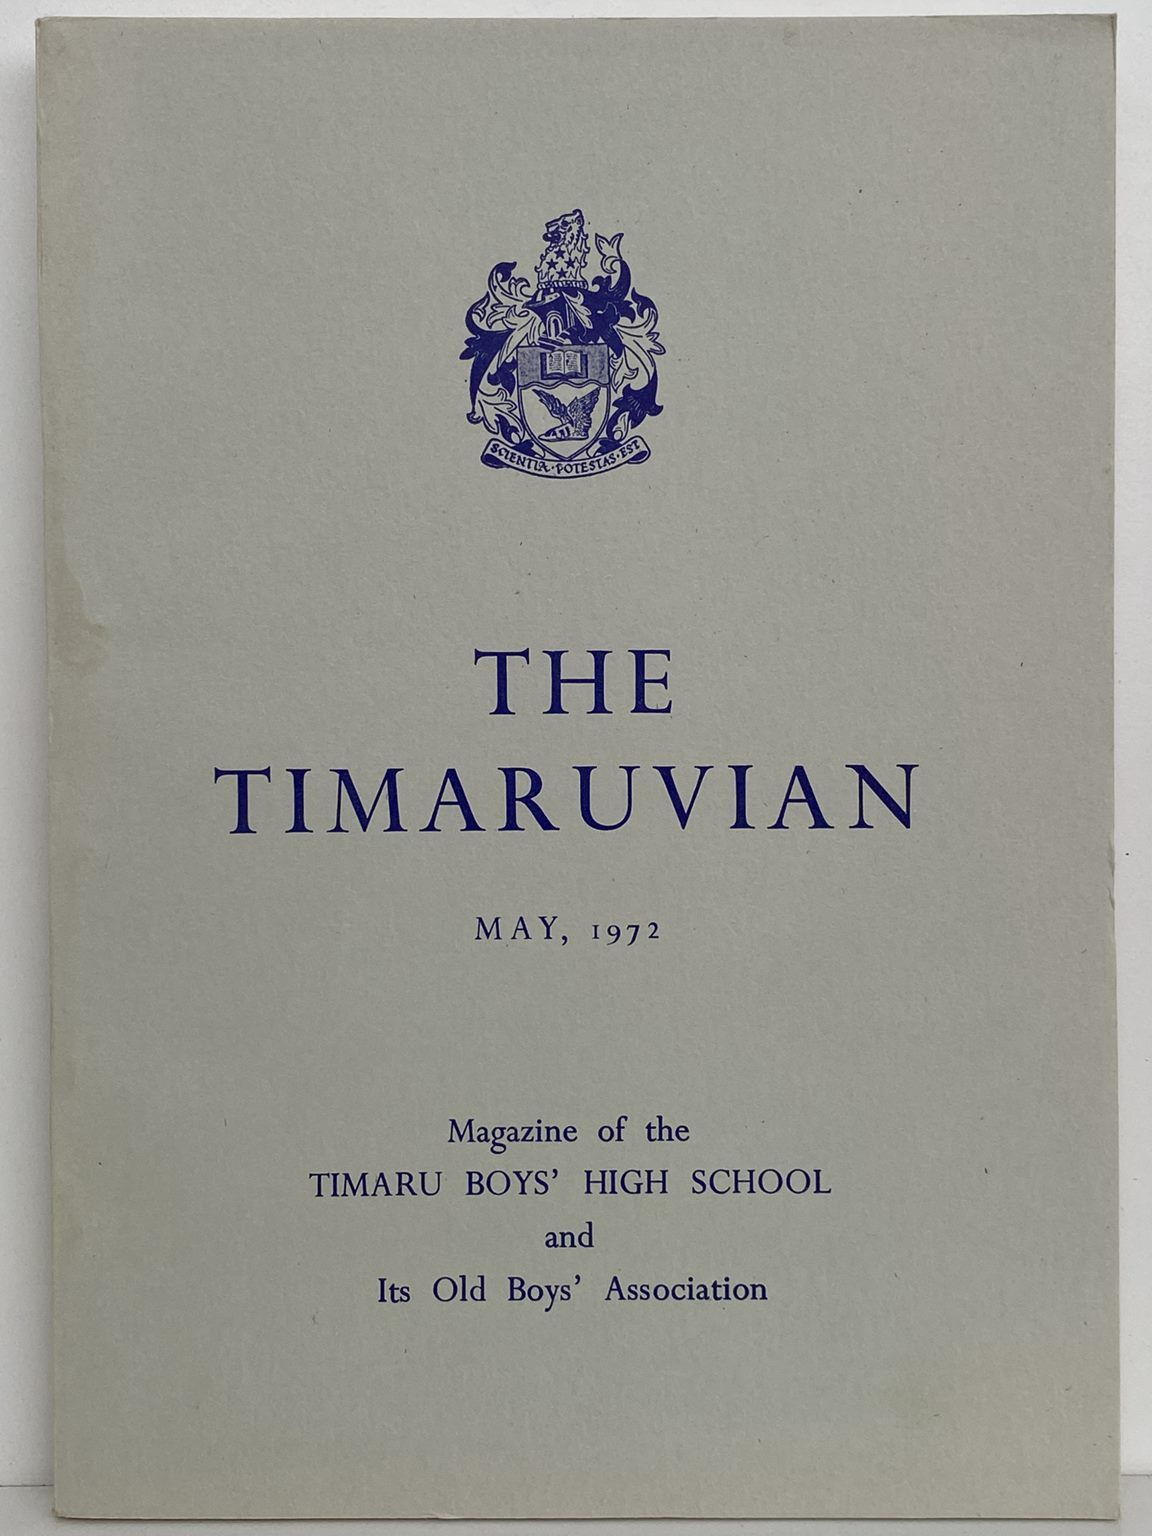 THE TIMARUVIAN: Magazine of the Timaru Boys' High School and its Old Boys' Association 1972